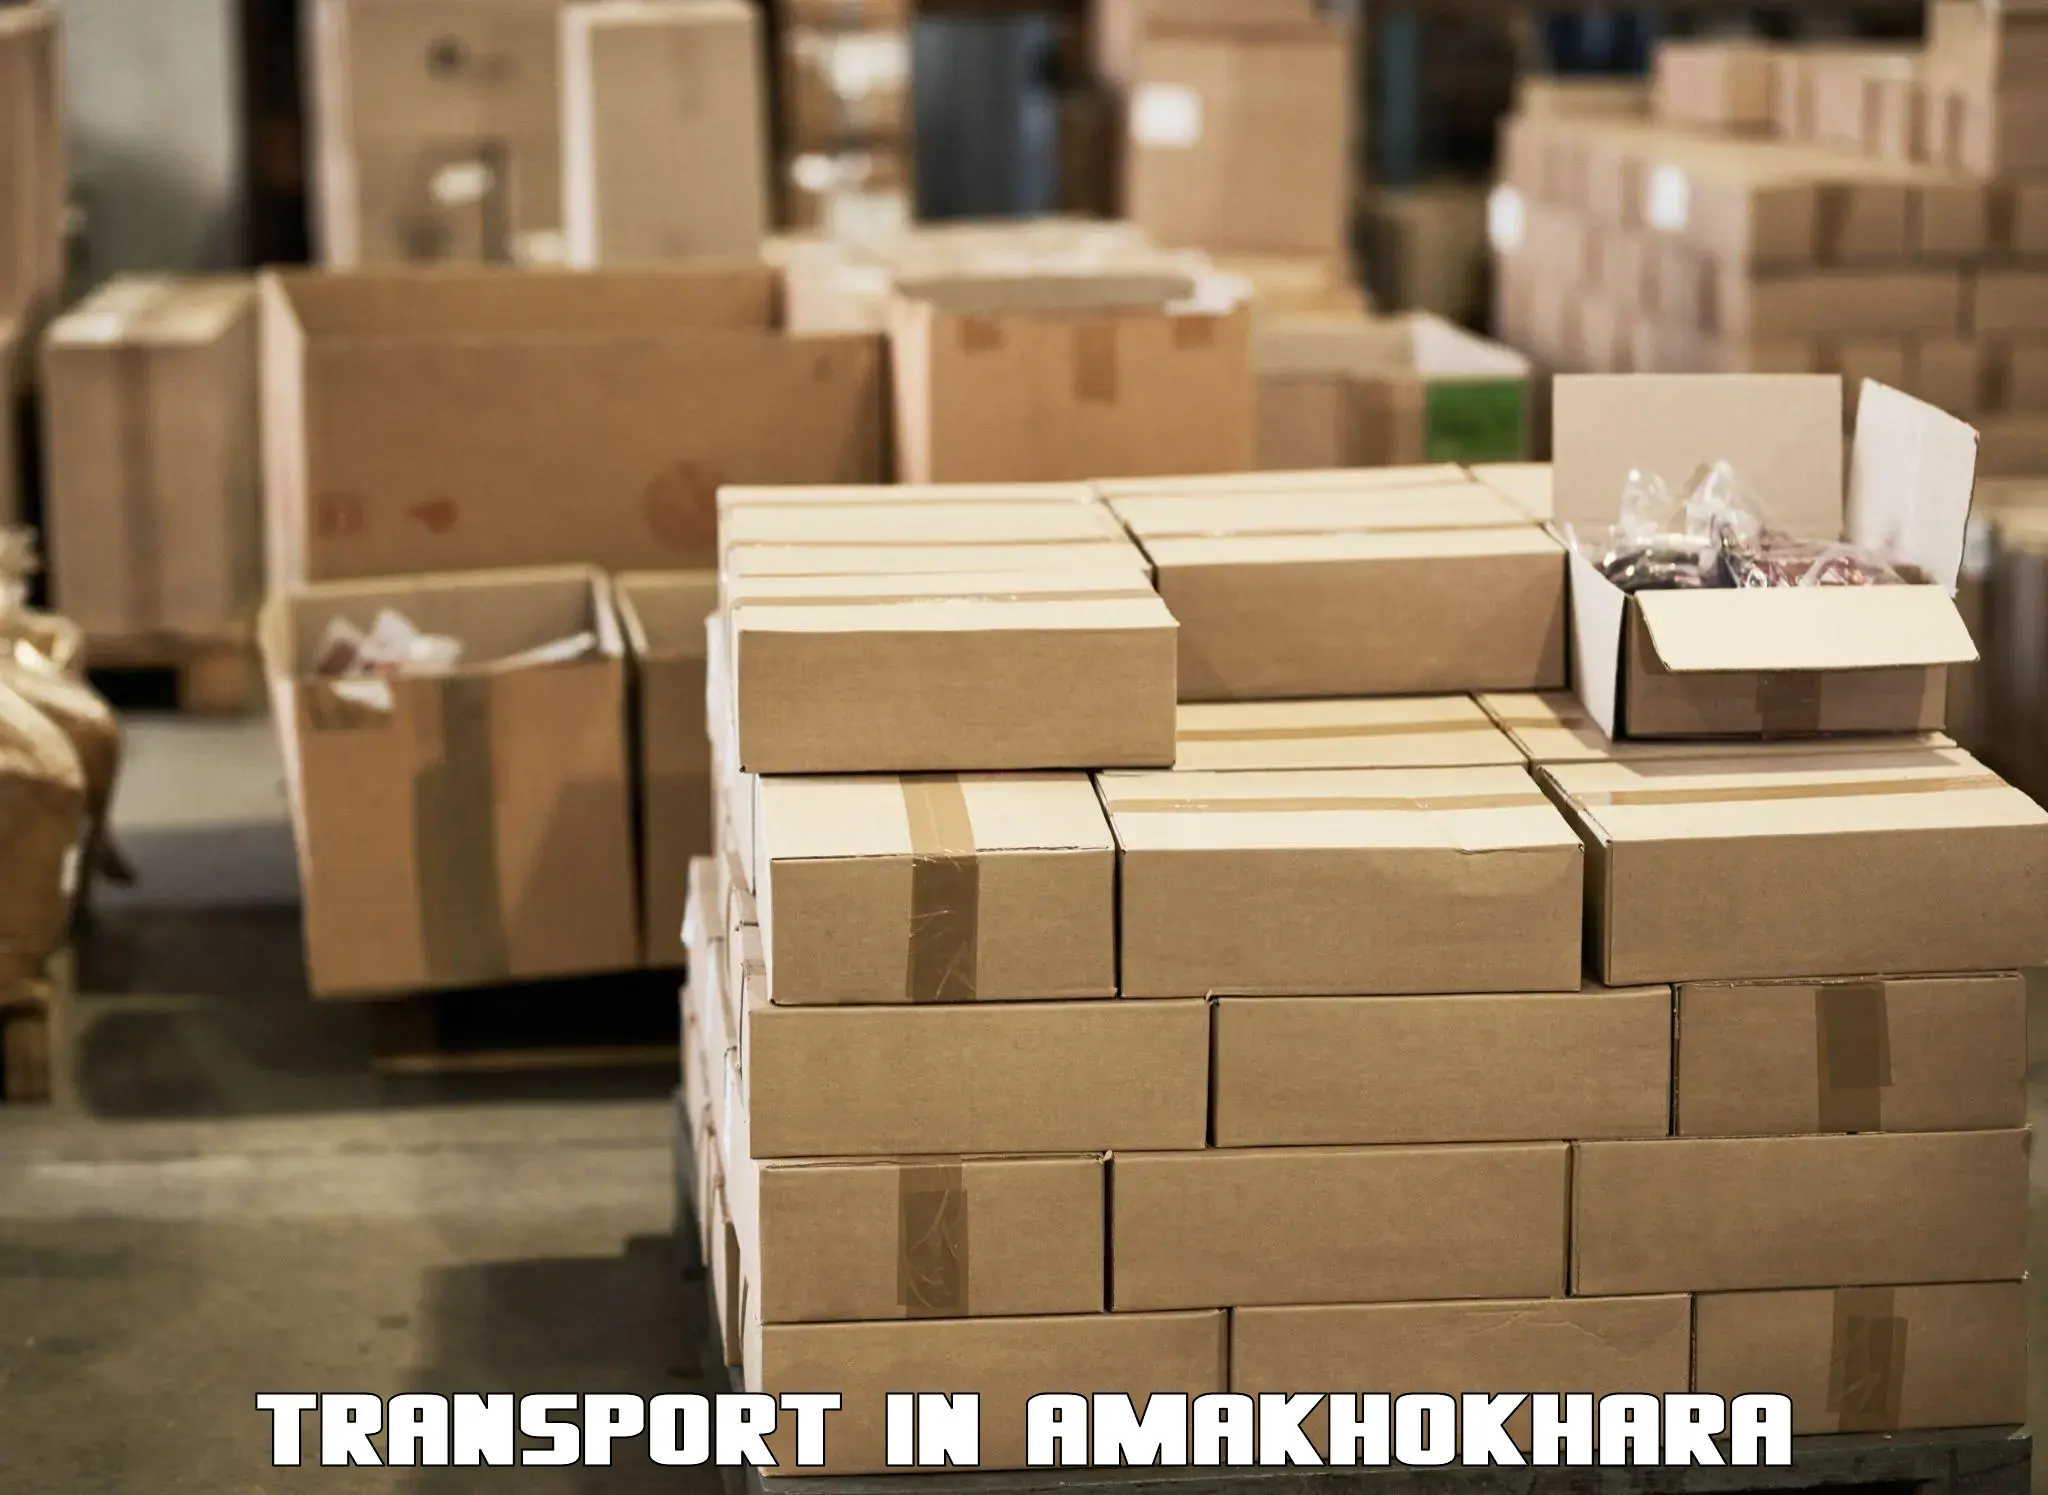 Road transport services in Amakhokhara